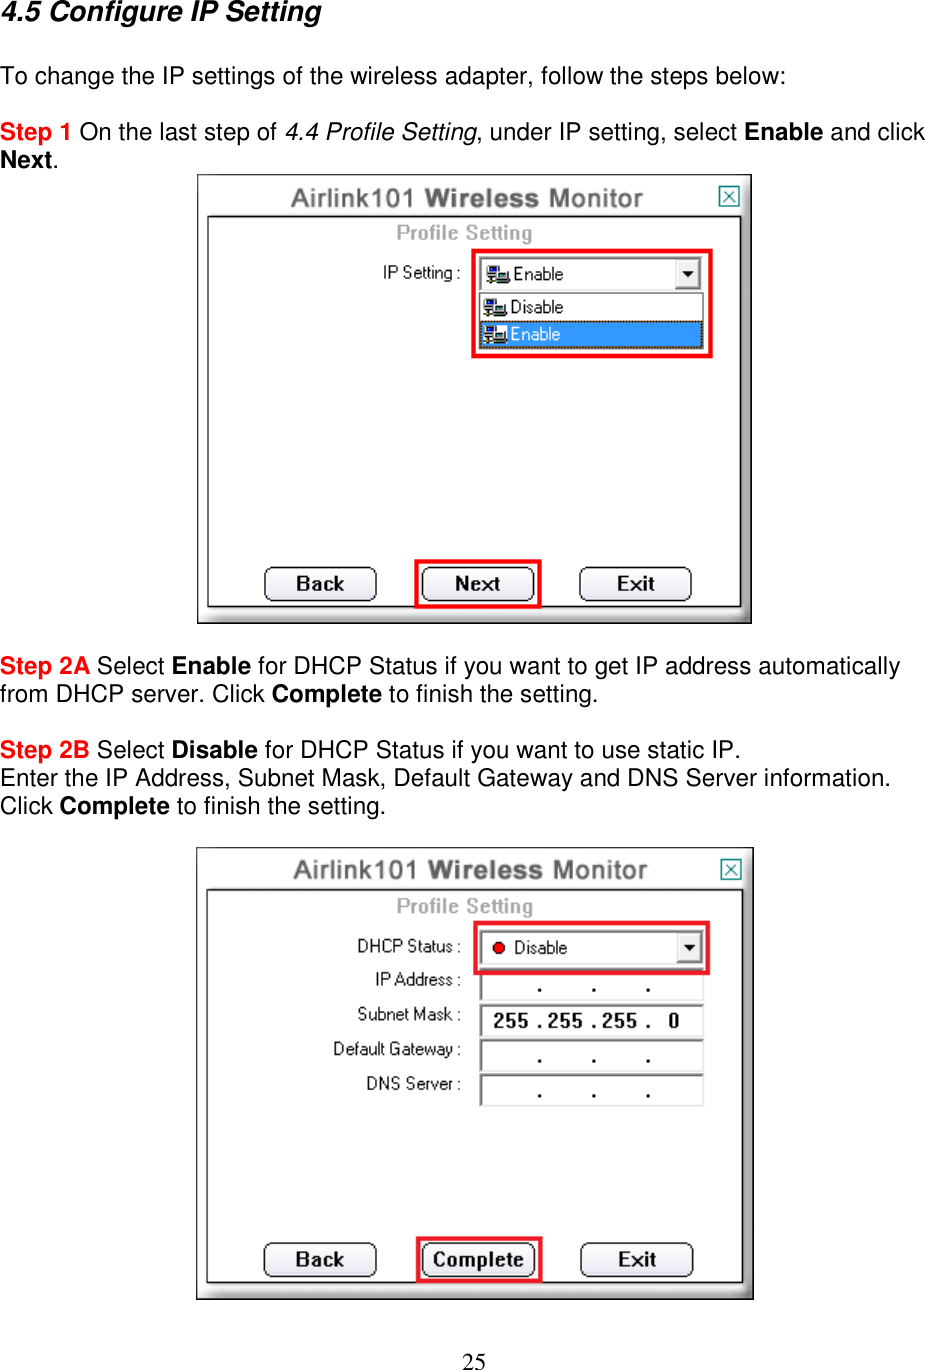 25 4.5 Configure IP Setting  To change the IP settings of the wireless adapter, follow the steps below:  Step 1 On the last step of 4.4 Profile Setting, under IP setting, select Enable and click Next.   Step 2A Select Enable for DHCP Status if you want to get IP address automatically from DHCP server. Click Complete to finish the setting.  Step 2B Select Disable for DHCP Status if you want to use static IP.  Enter the IP Address, Subnet Mask, Default Gateway and DNS Server information. Click Complete to finish the setting.   